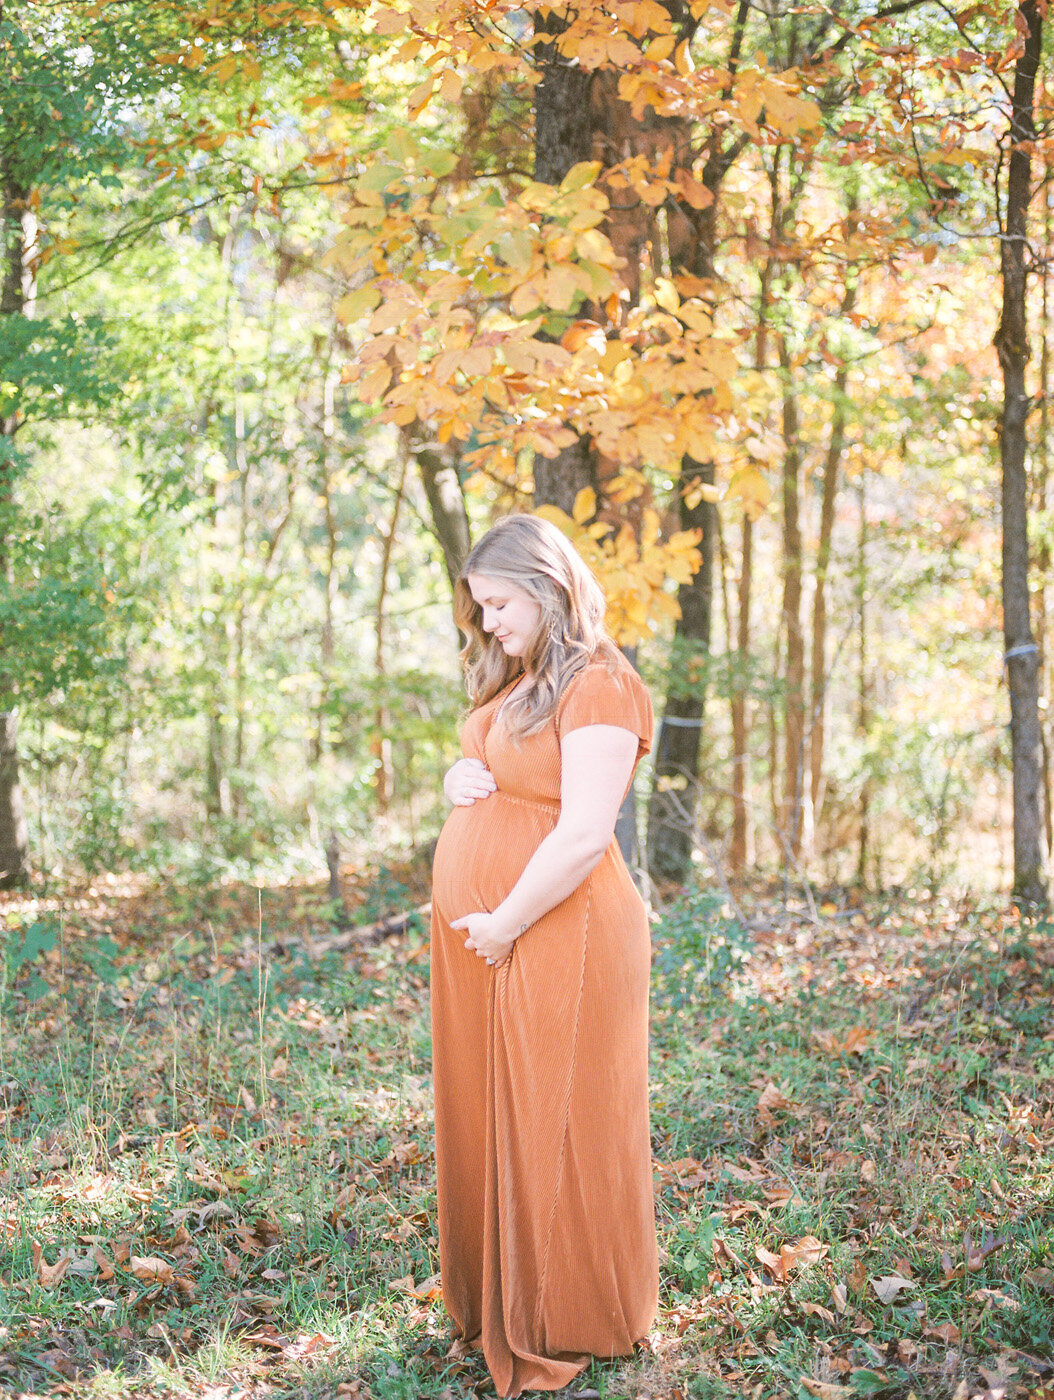 Raleigh Maternity Photographer | Jessica Agee Photography - 015